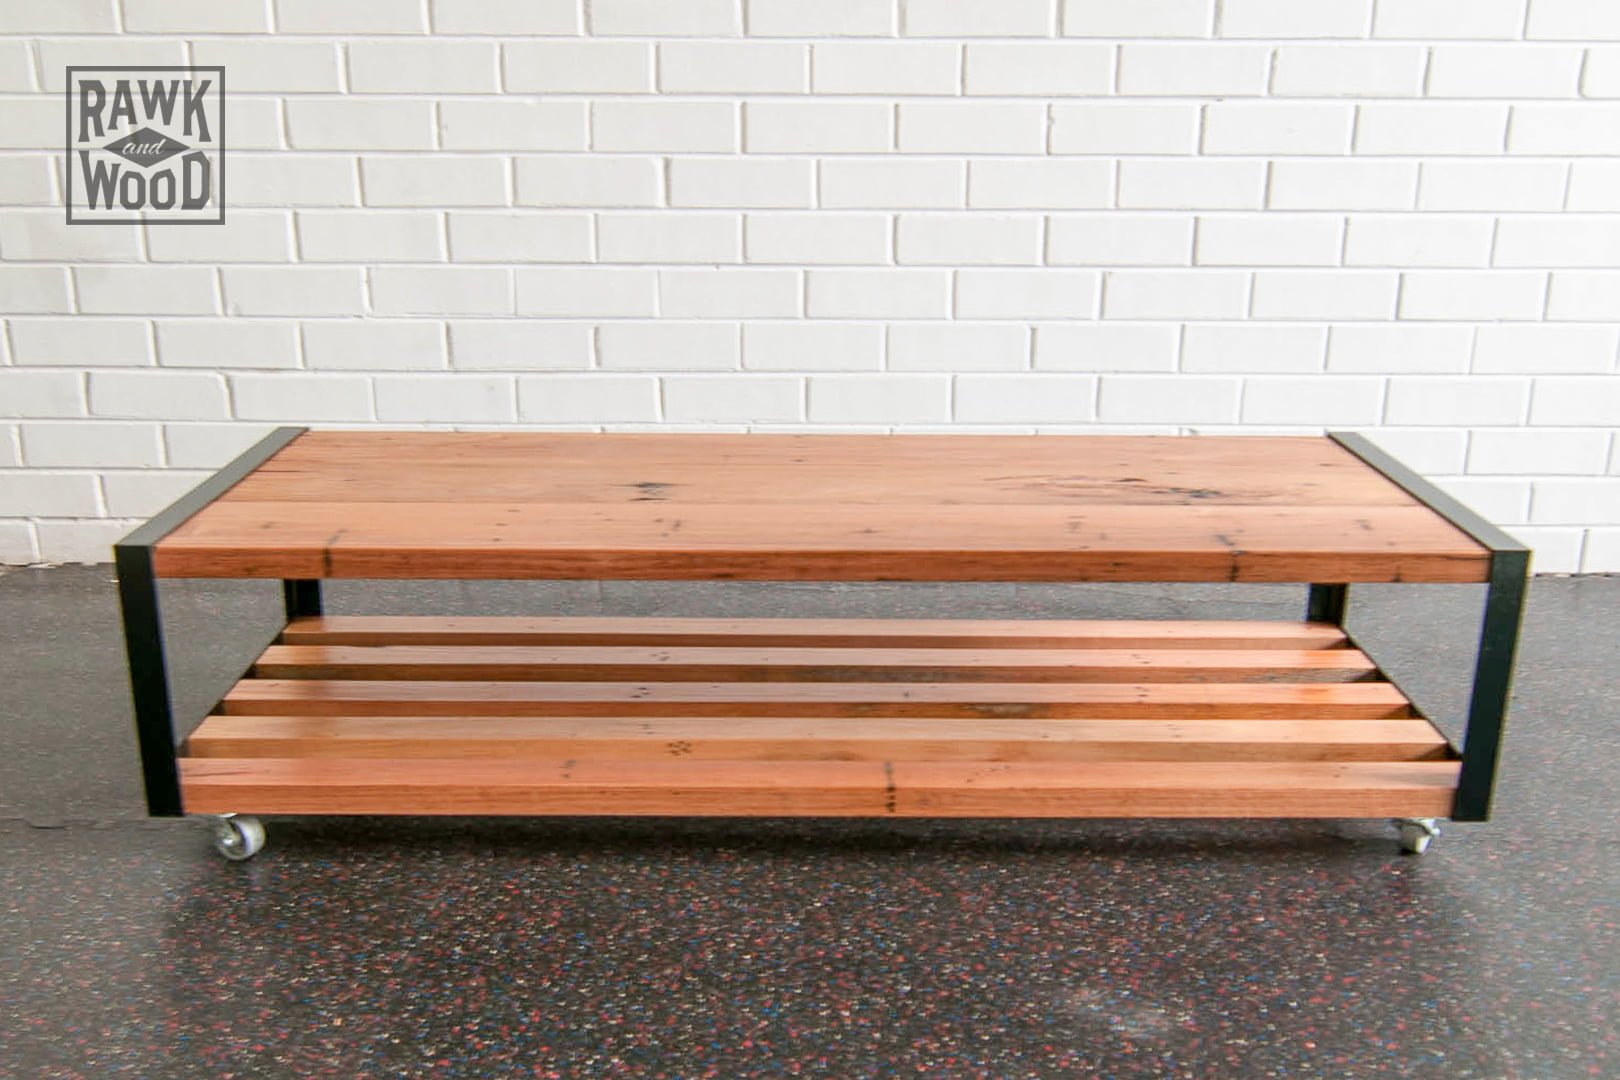 Recycled-Timber-TV-Unit, made in Melbourne by Rawk and Wood